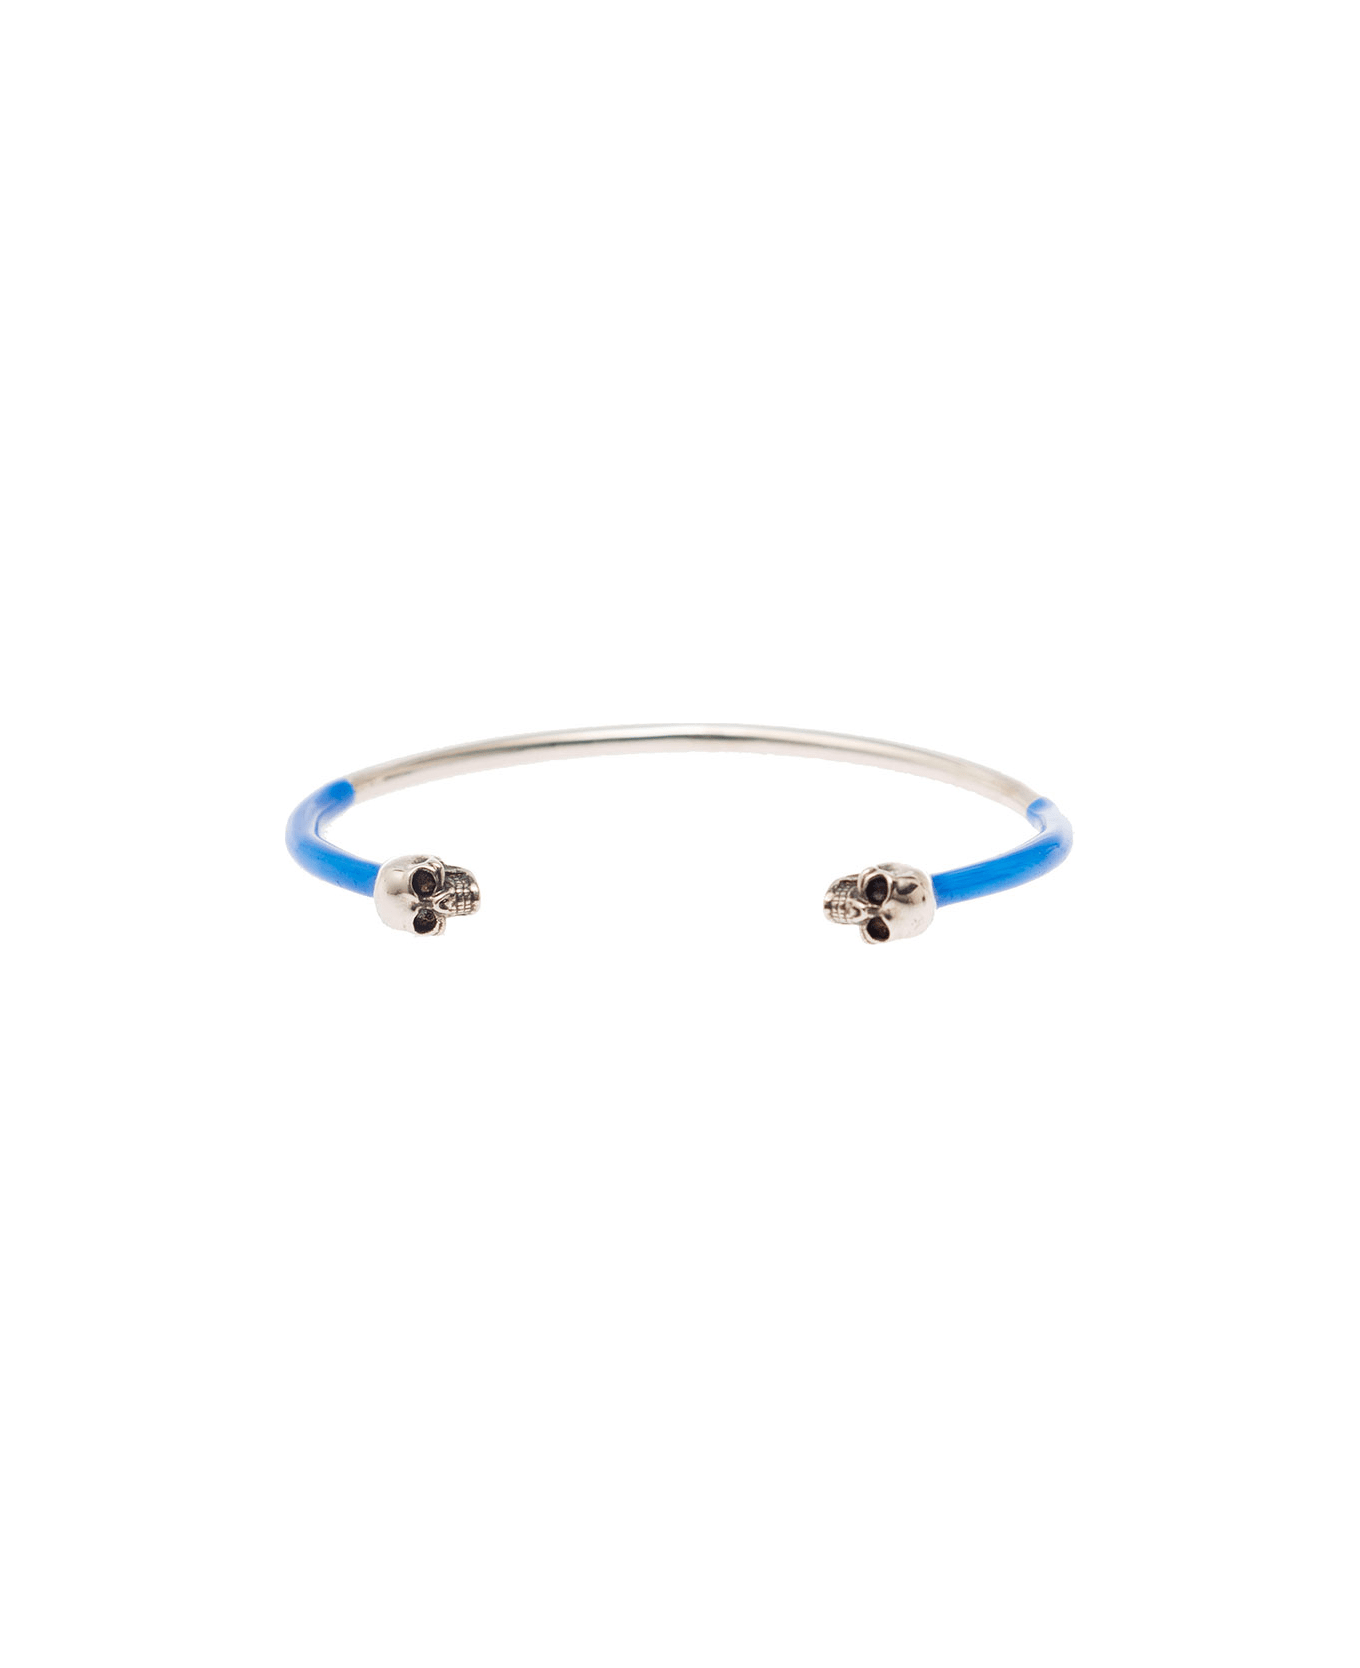 Alexander McQueen Aged Silver And Blue Bangle Bracelet With Sull Details In Brass Man - Blu